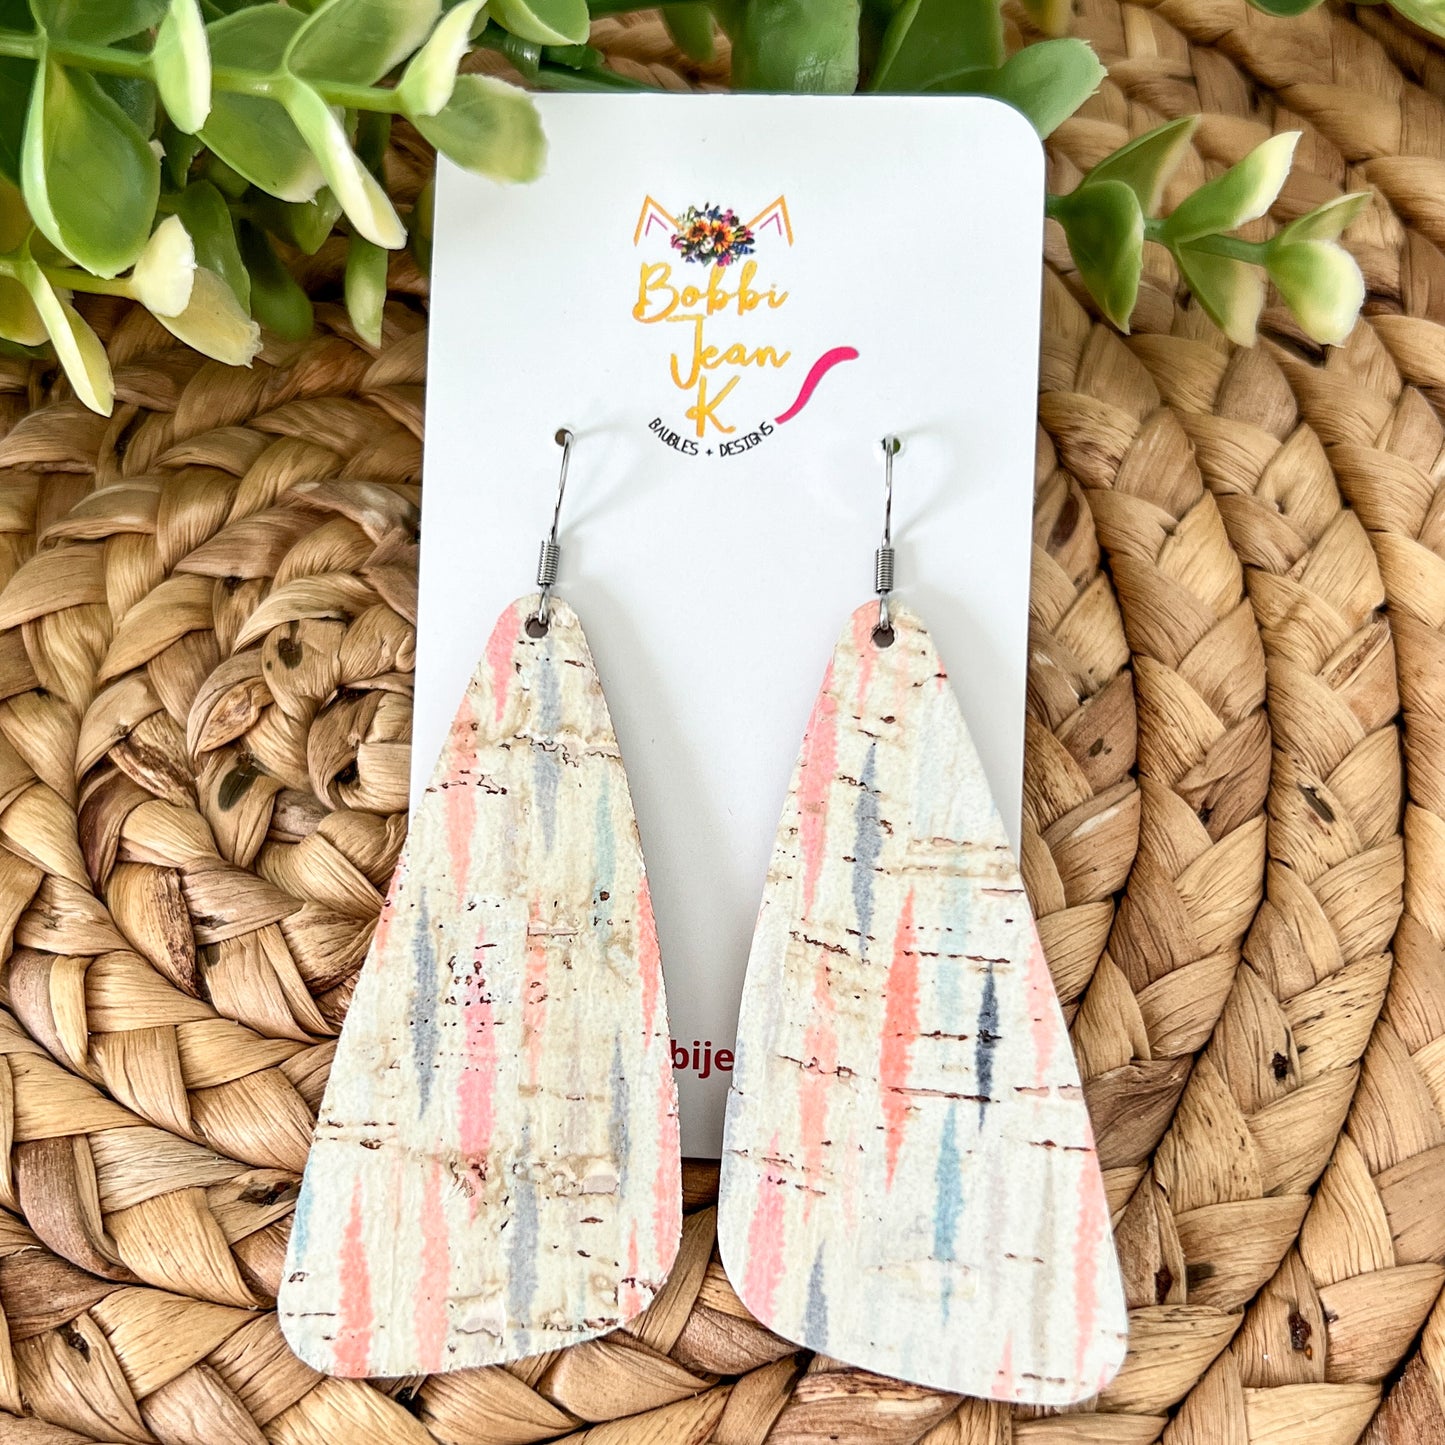 Coral Taffy Cork on Leather Earrings: Choose From 2 Styles - LAST CHANCE